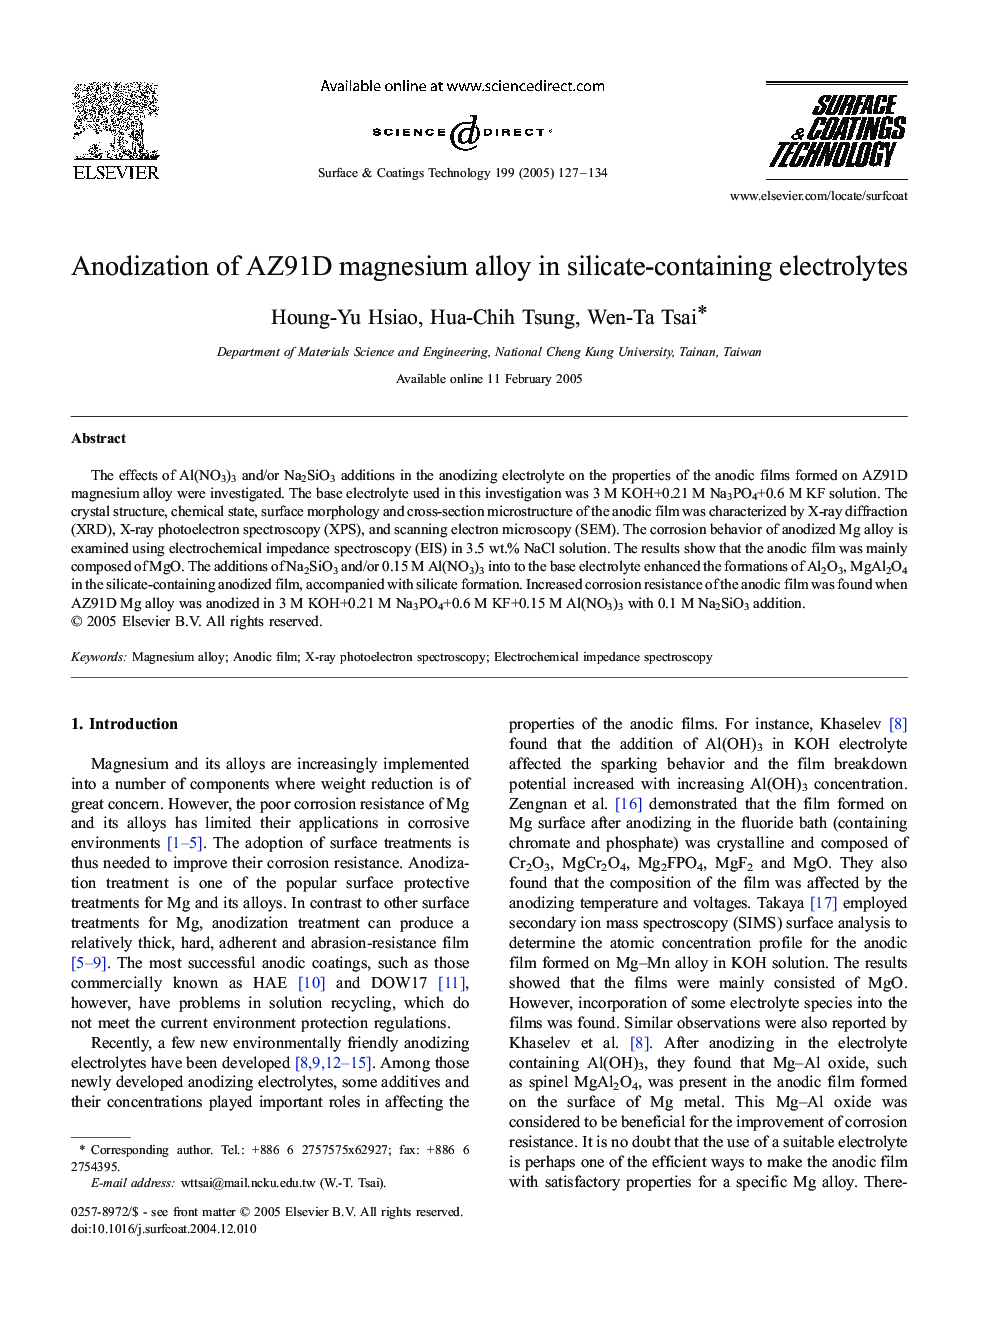 Anodization of AZ91D magnesium alloy in silicate-containing electrolytes